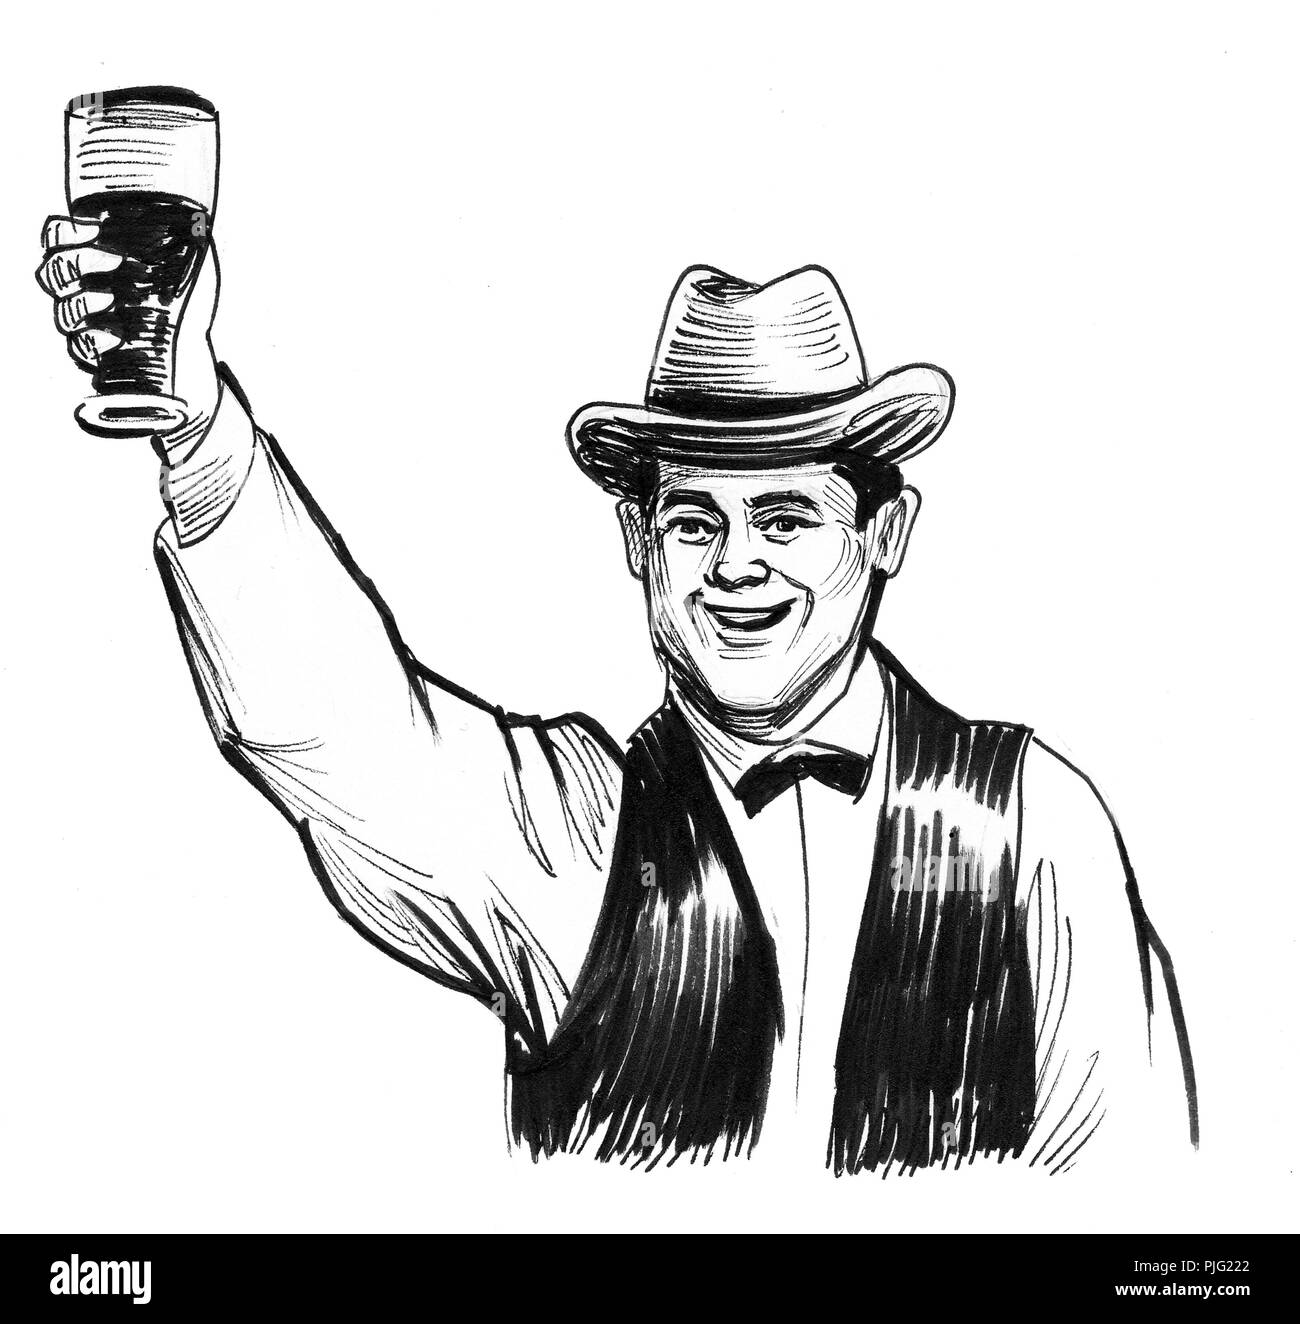 Man with a glass of beer. Ink black and white illustration Stock Photo